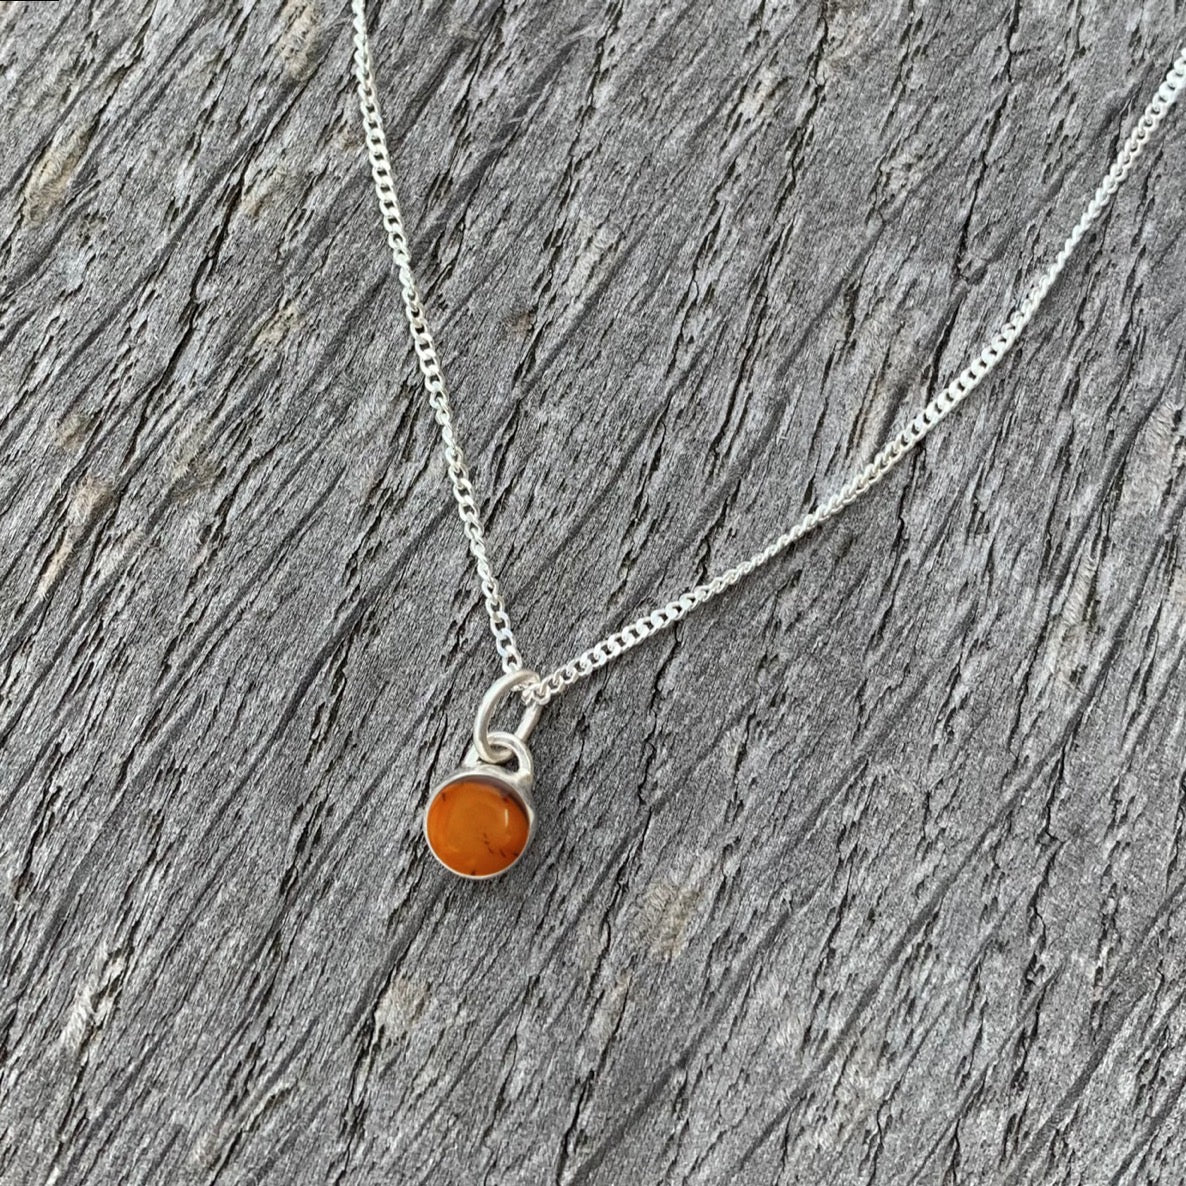 An amber stone set in silver on a sterling silver chain.